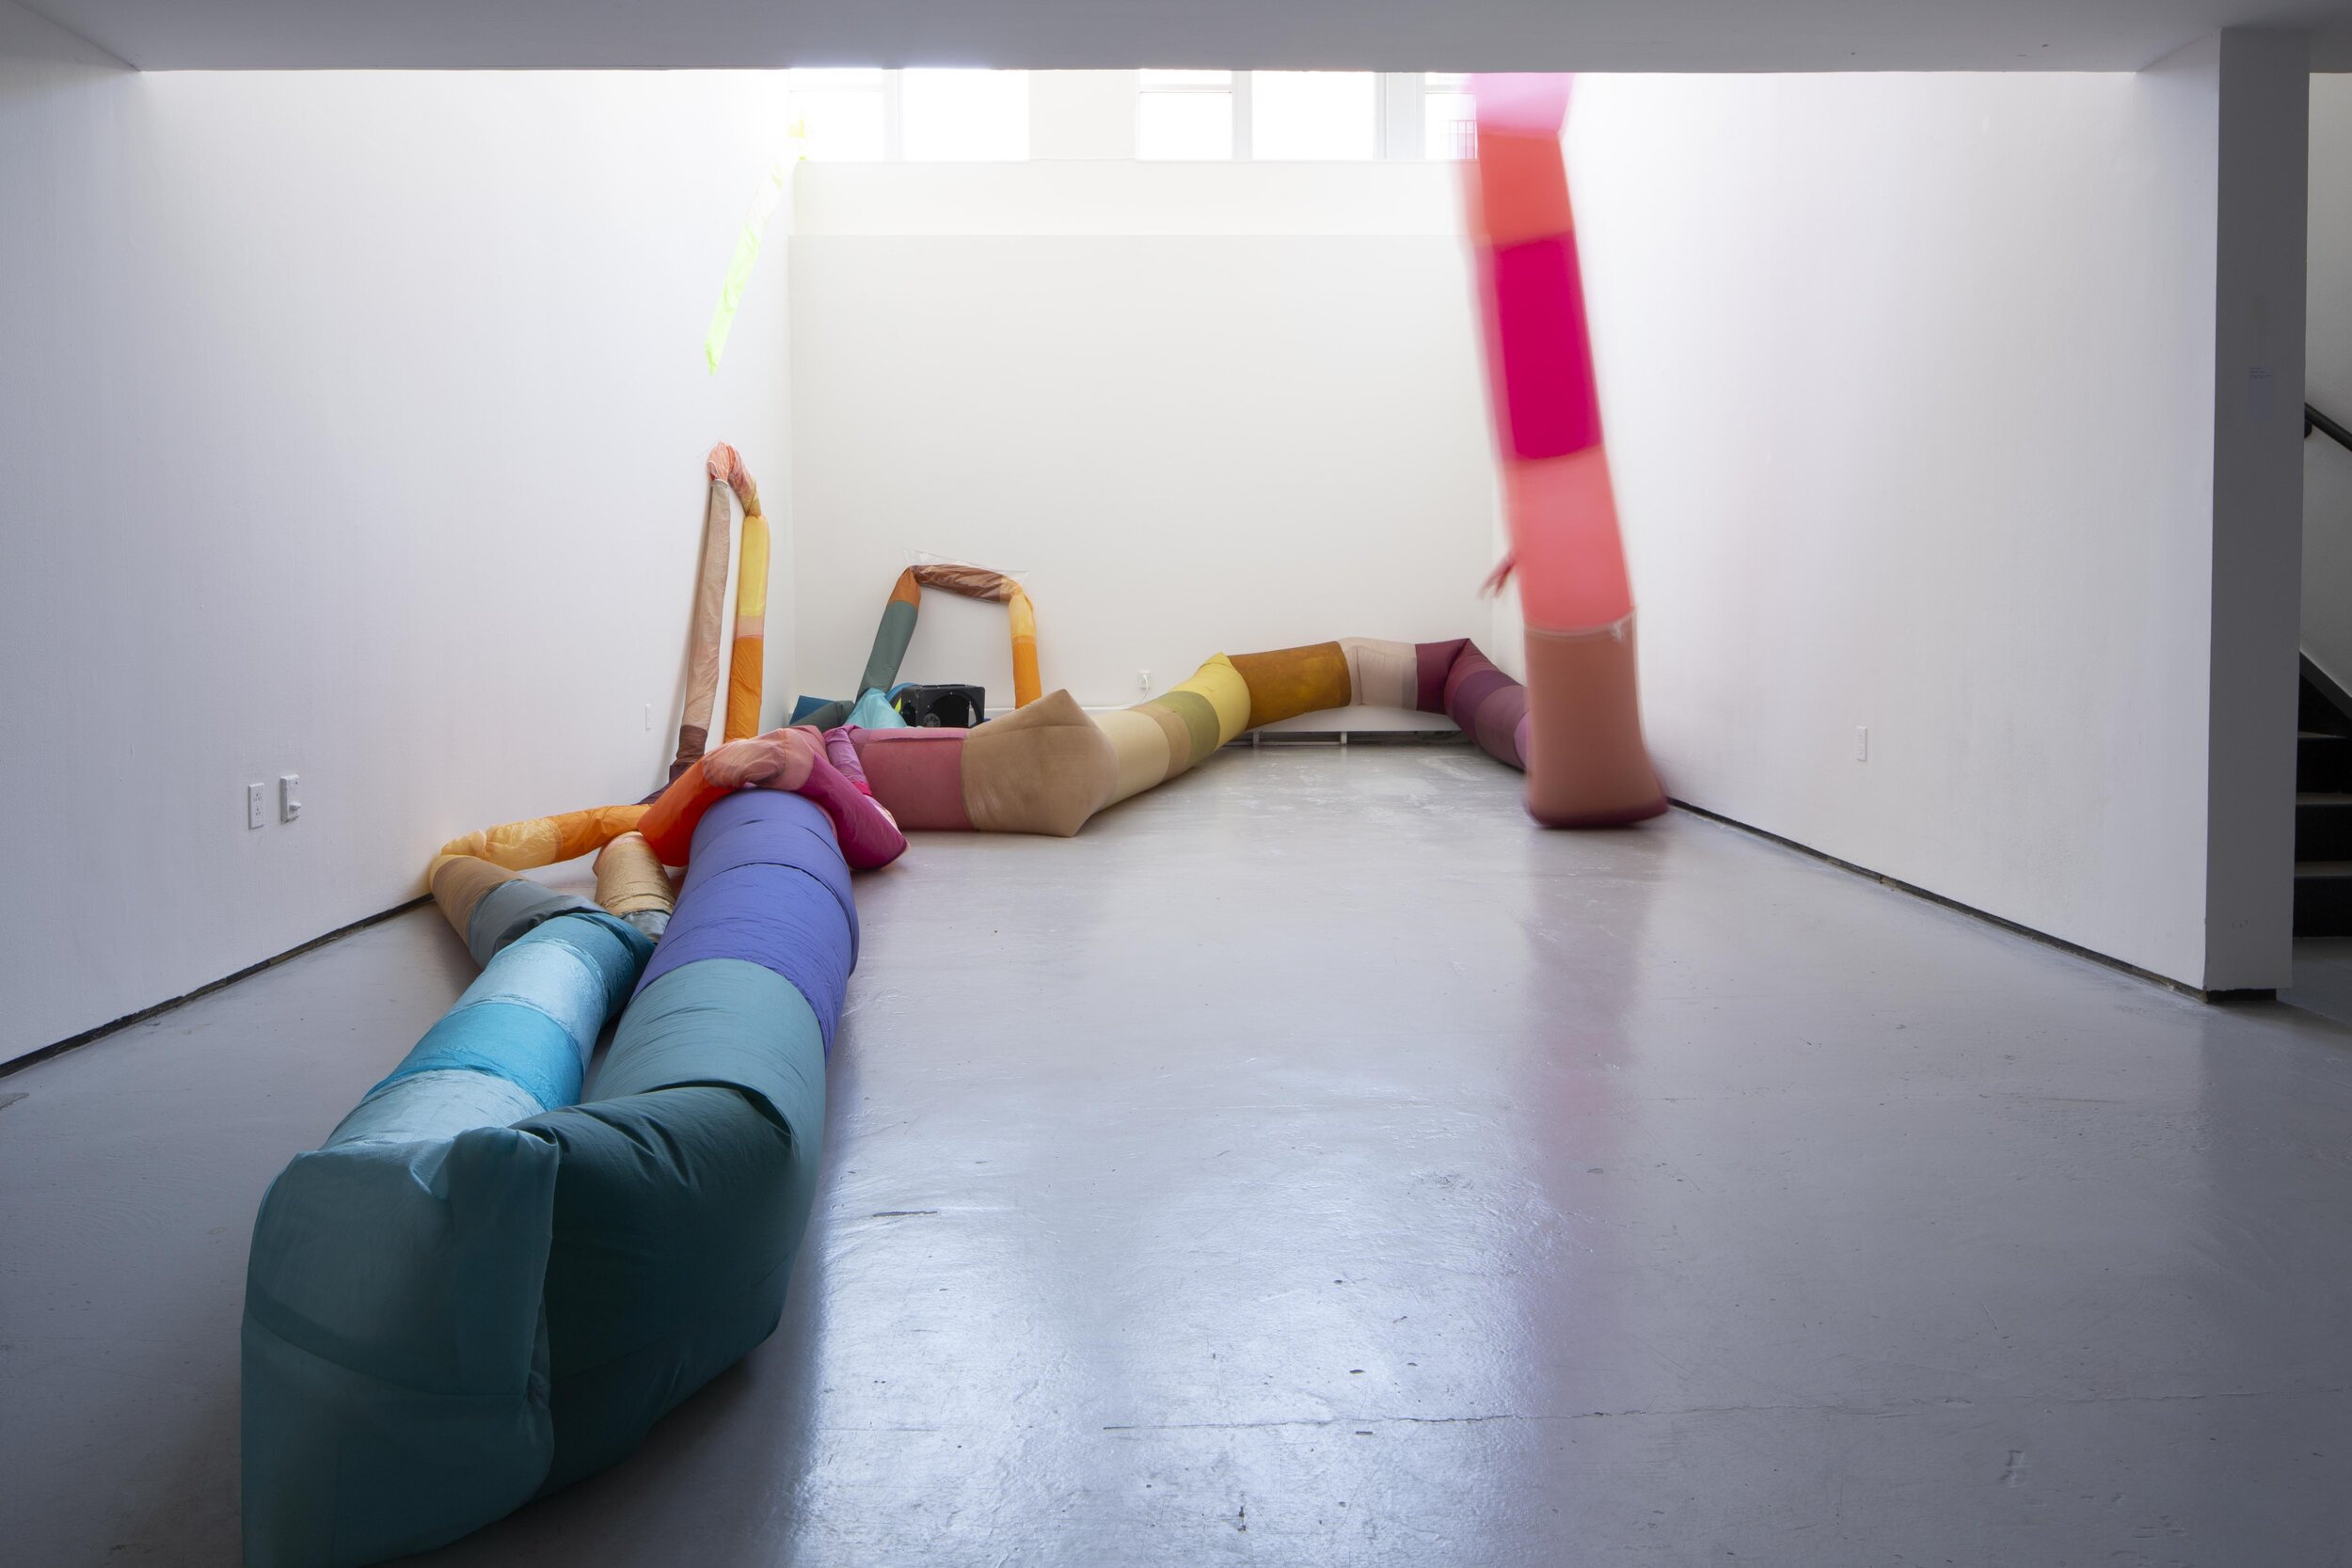  Peyton Peyton  Labber Rinse Repeat , 2020 thread, acid-dyed nylon, plastic tarp, zippers, elastic, velcro, staples,  clear vinyl, air blowers, interval timers, decoy duck butts, cushion dimensions variable to installation photo by Sol Avi Erez 